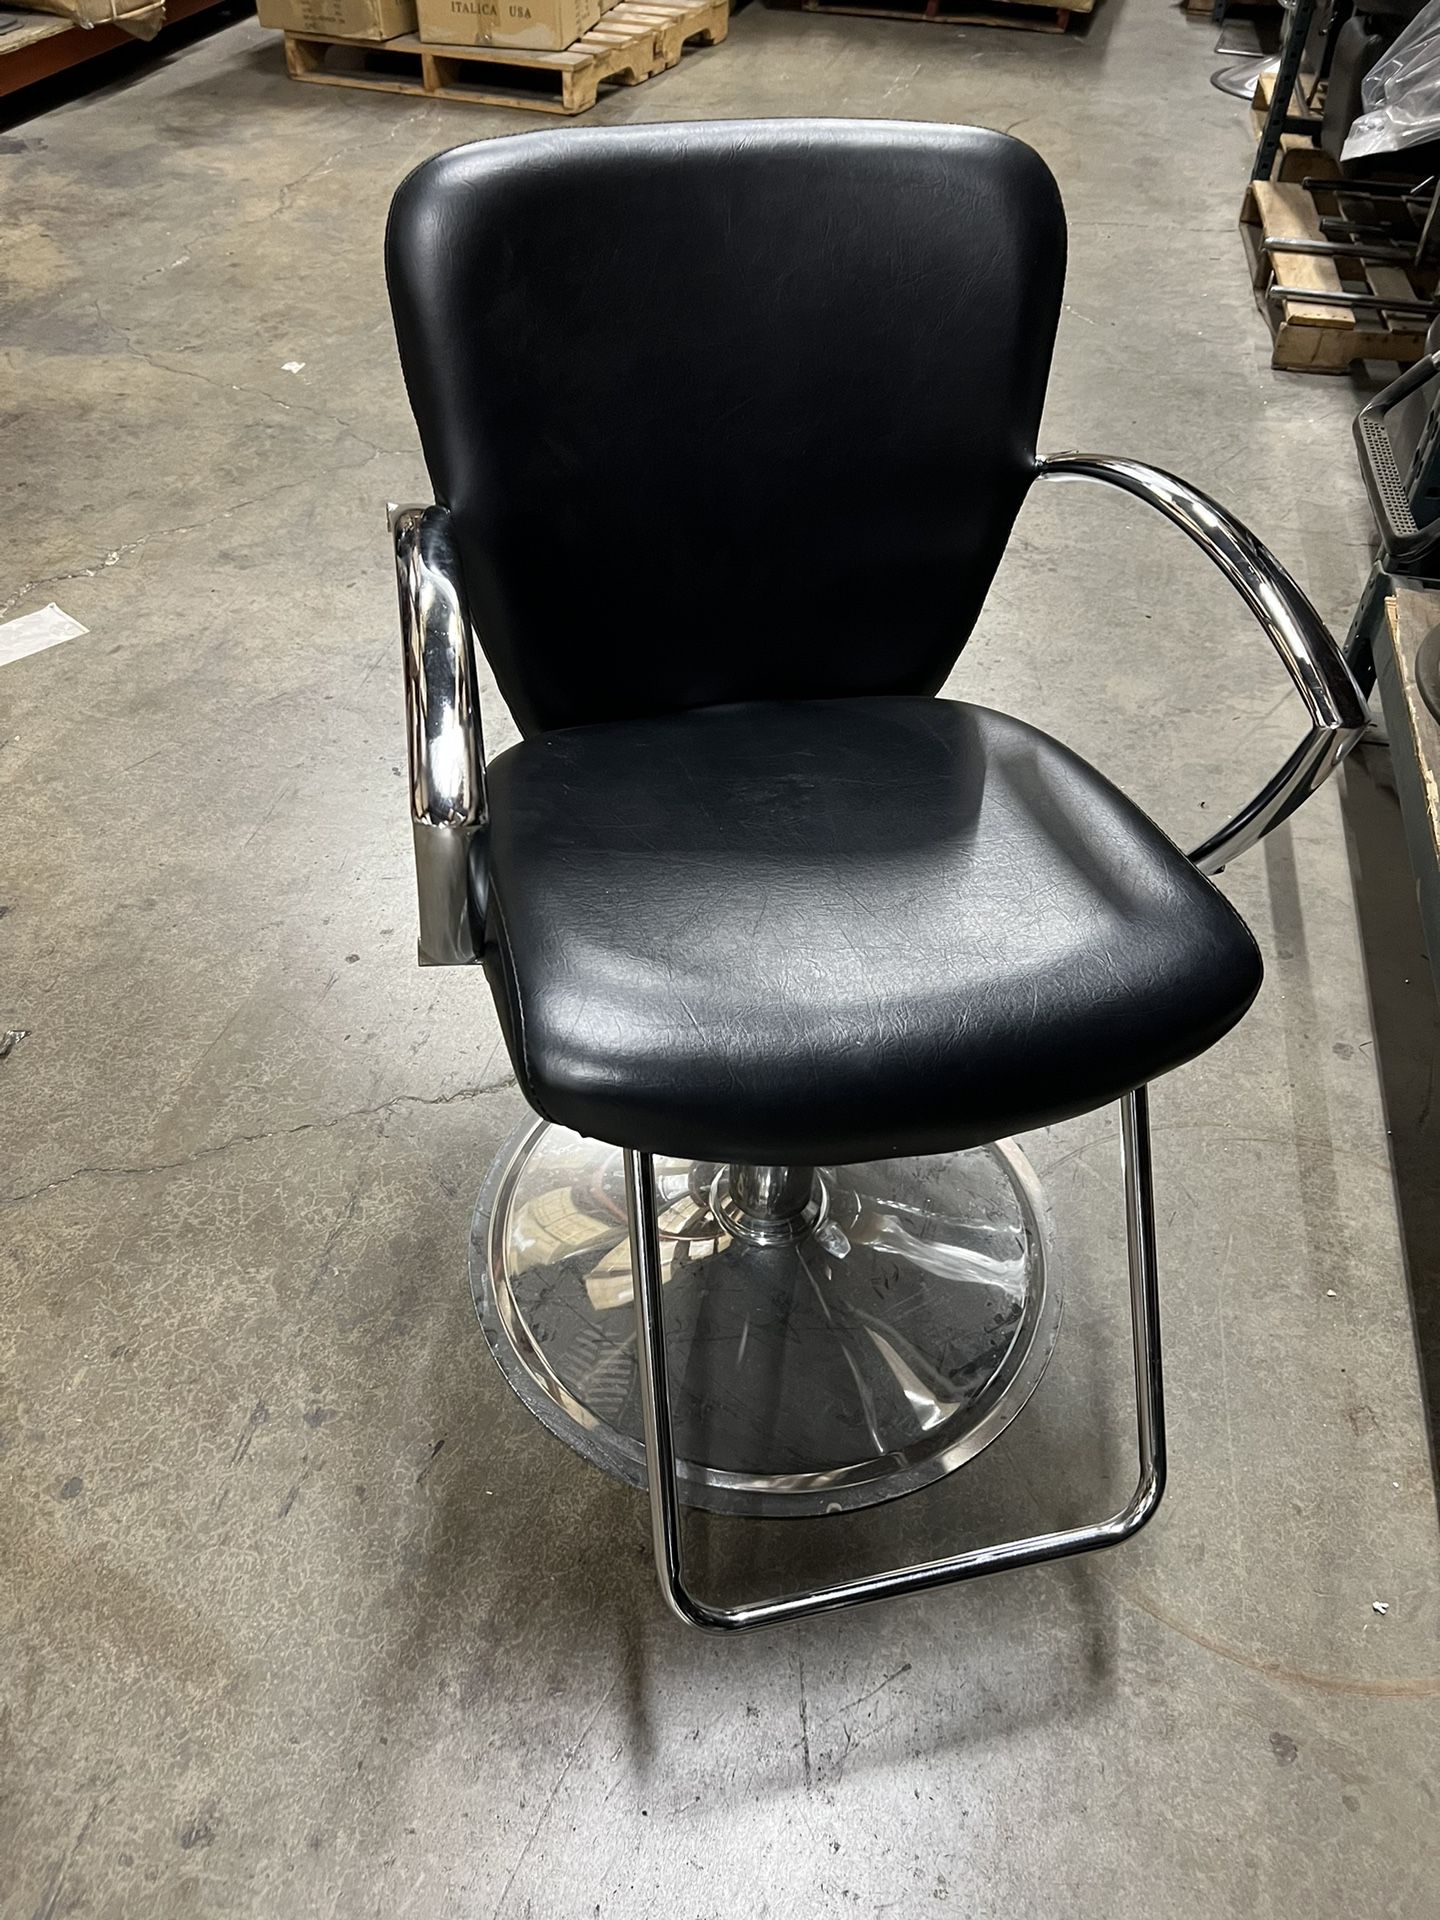 black styling chair